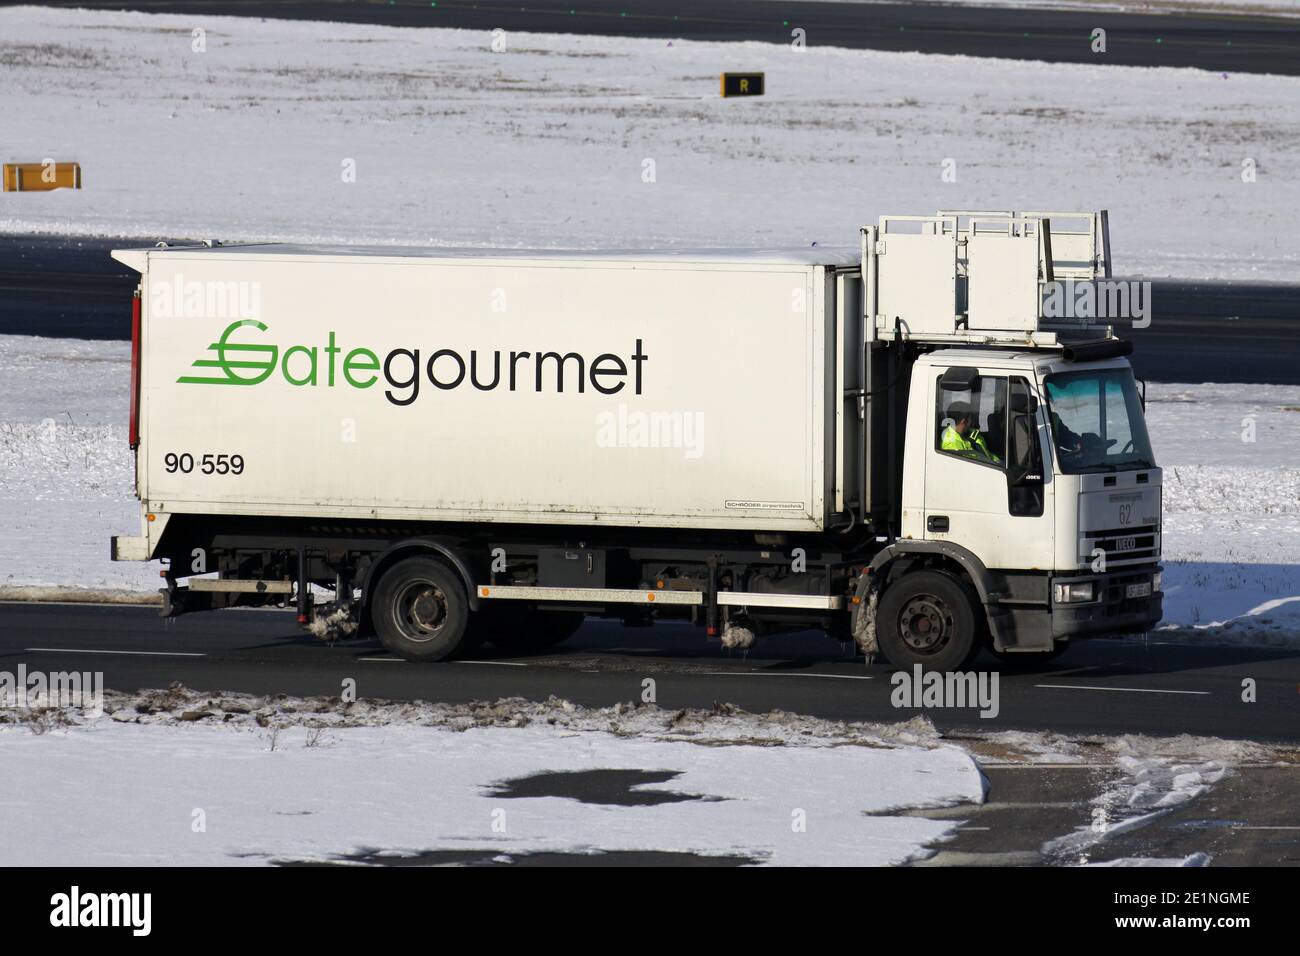 Gate Gourmet catering truck at Frankfurt Airport. Gate Gourmet is a leading global provider of airline catering and provisioning. Stock Photo